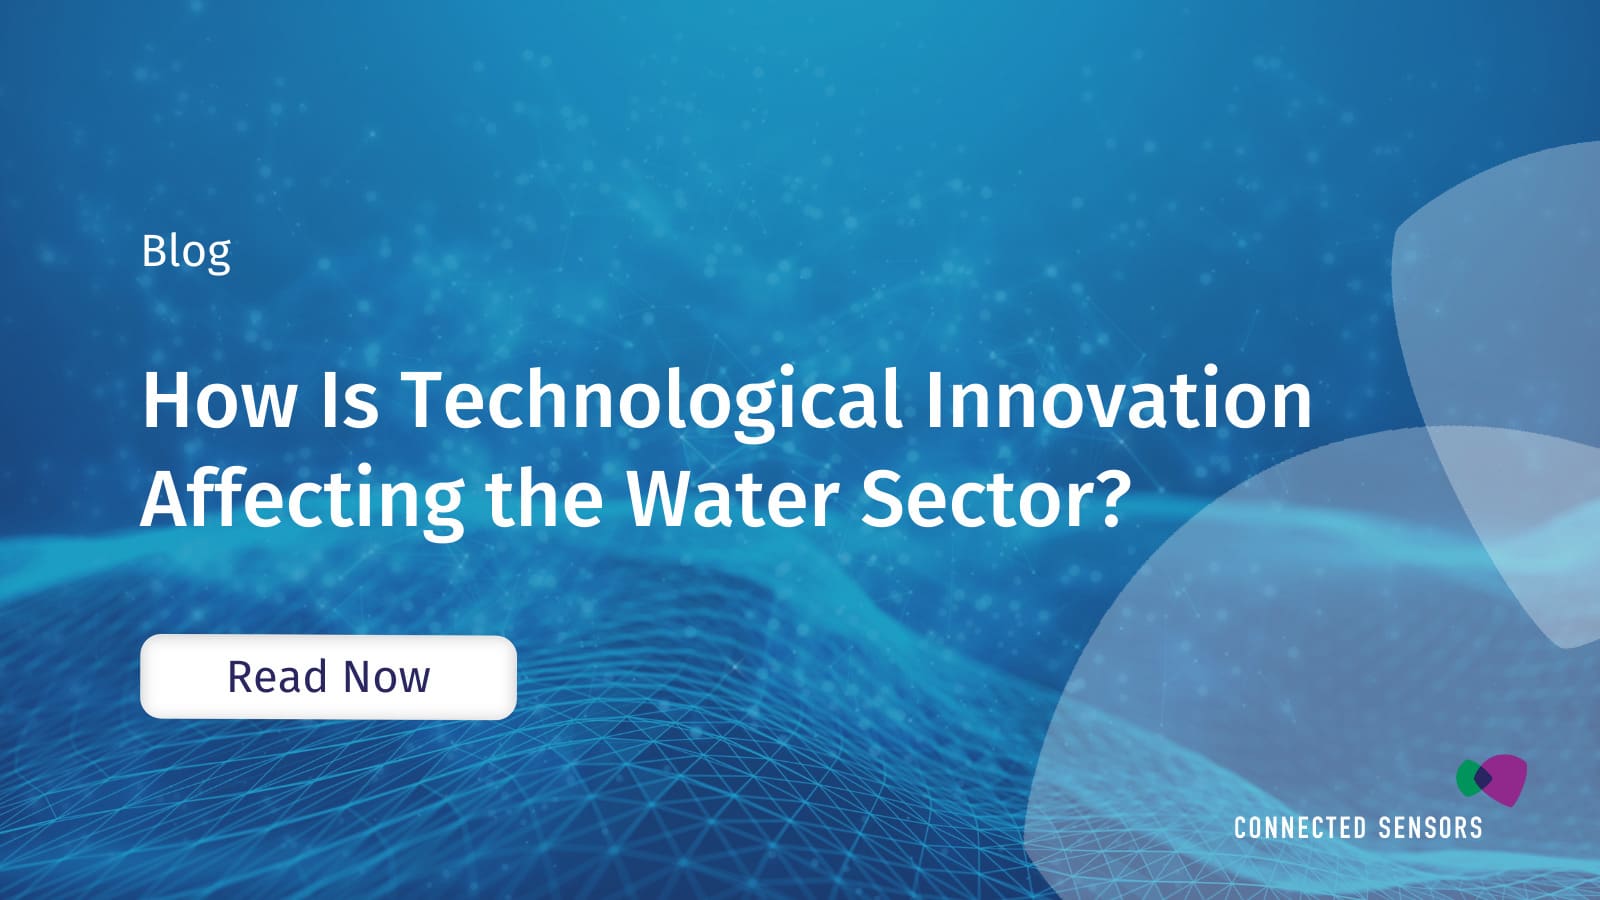 How Is Technological Innovation Affecting the Water Sector?